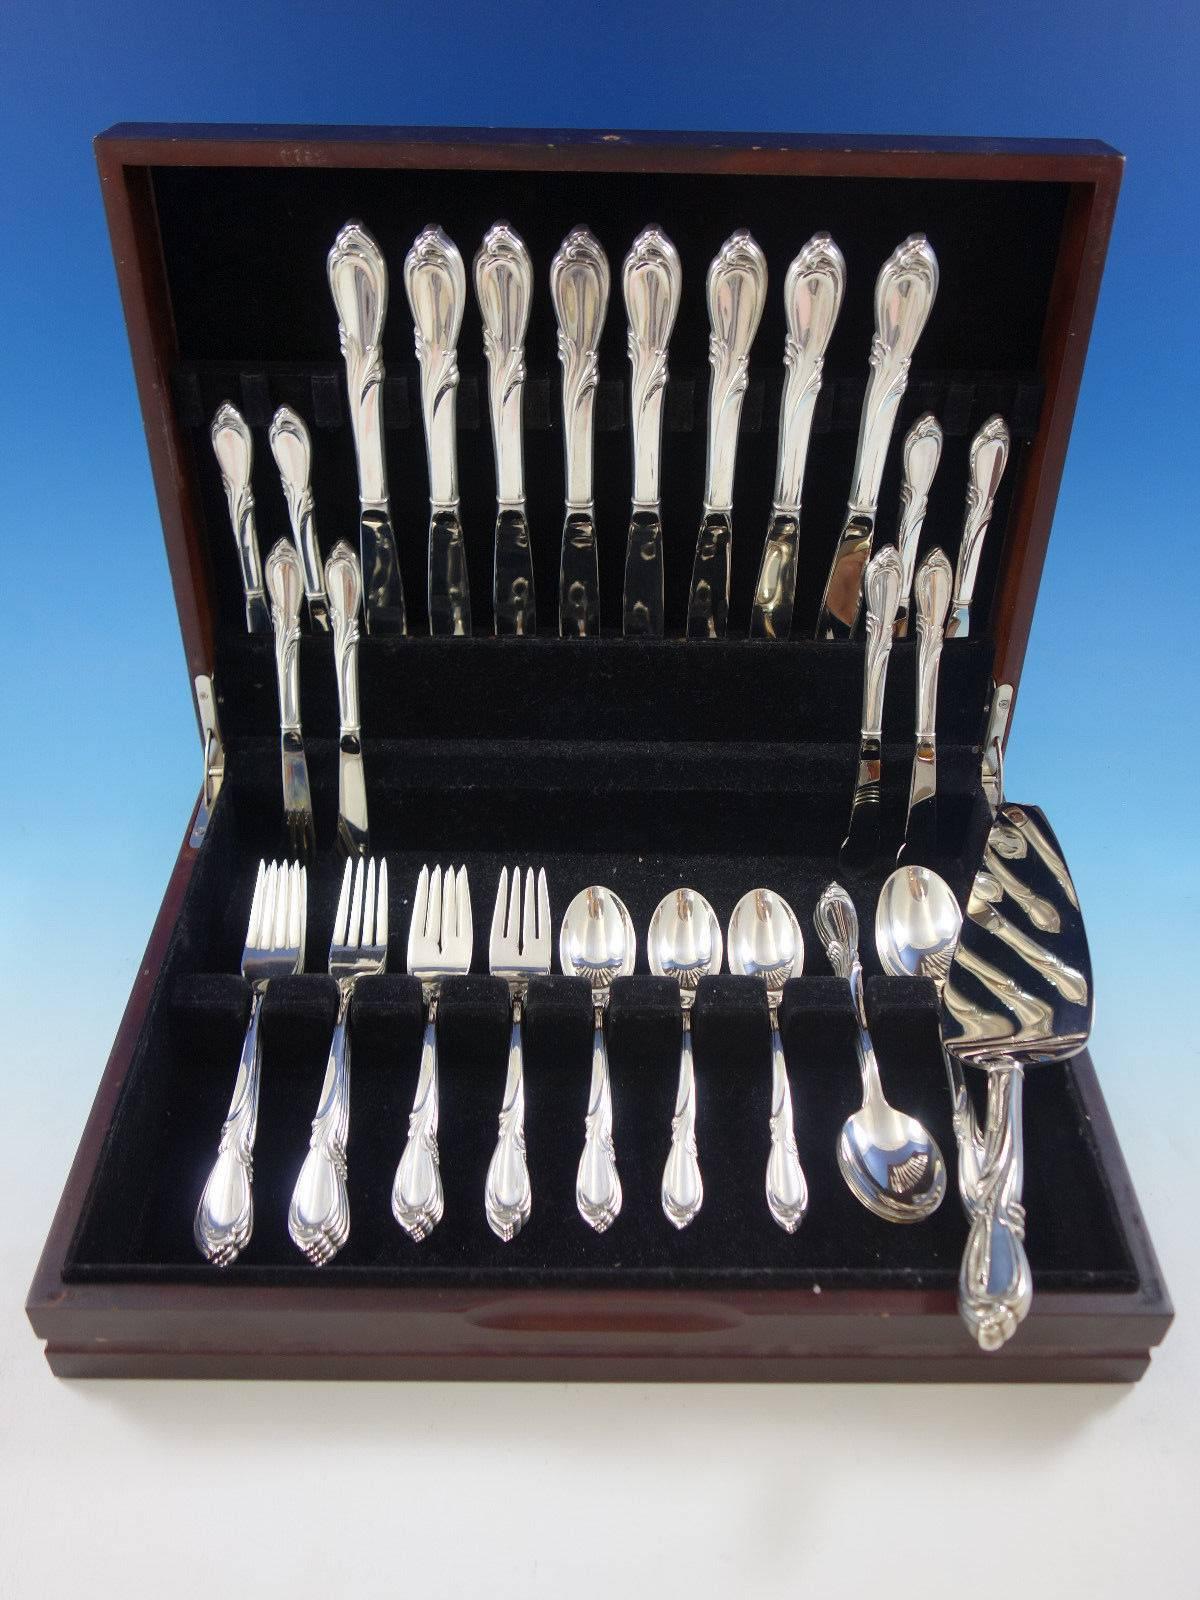 Rhapsody by international sterling silver flatware set, 49 pieces. This set includes: 

eight knives, 9 1/4